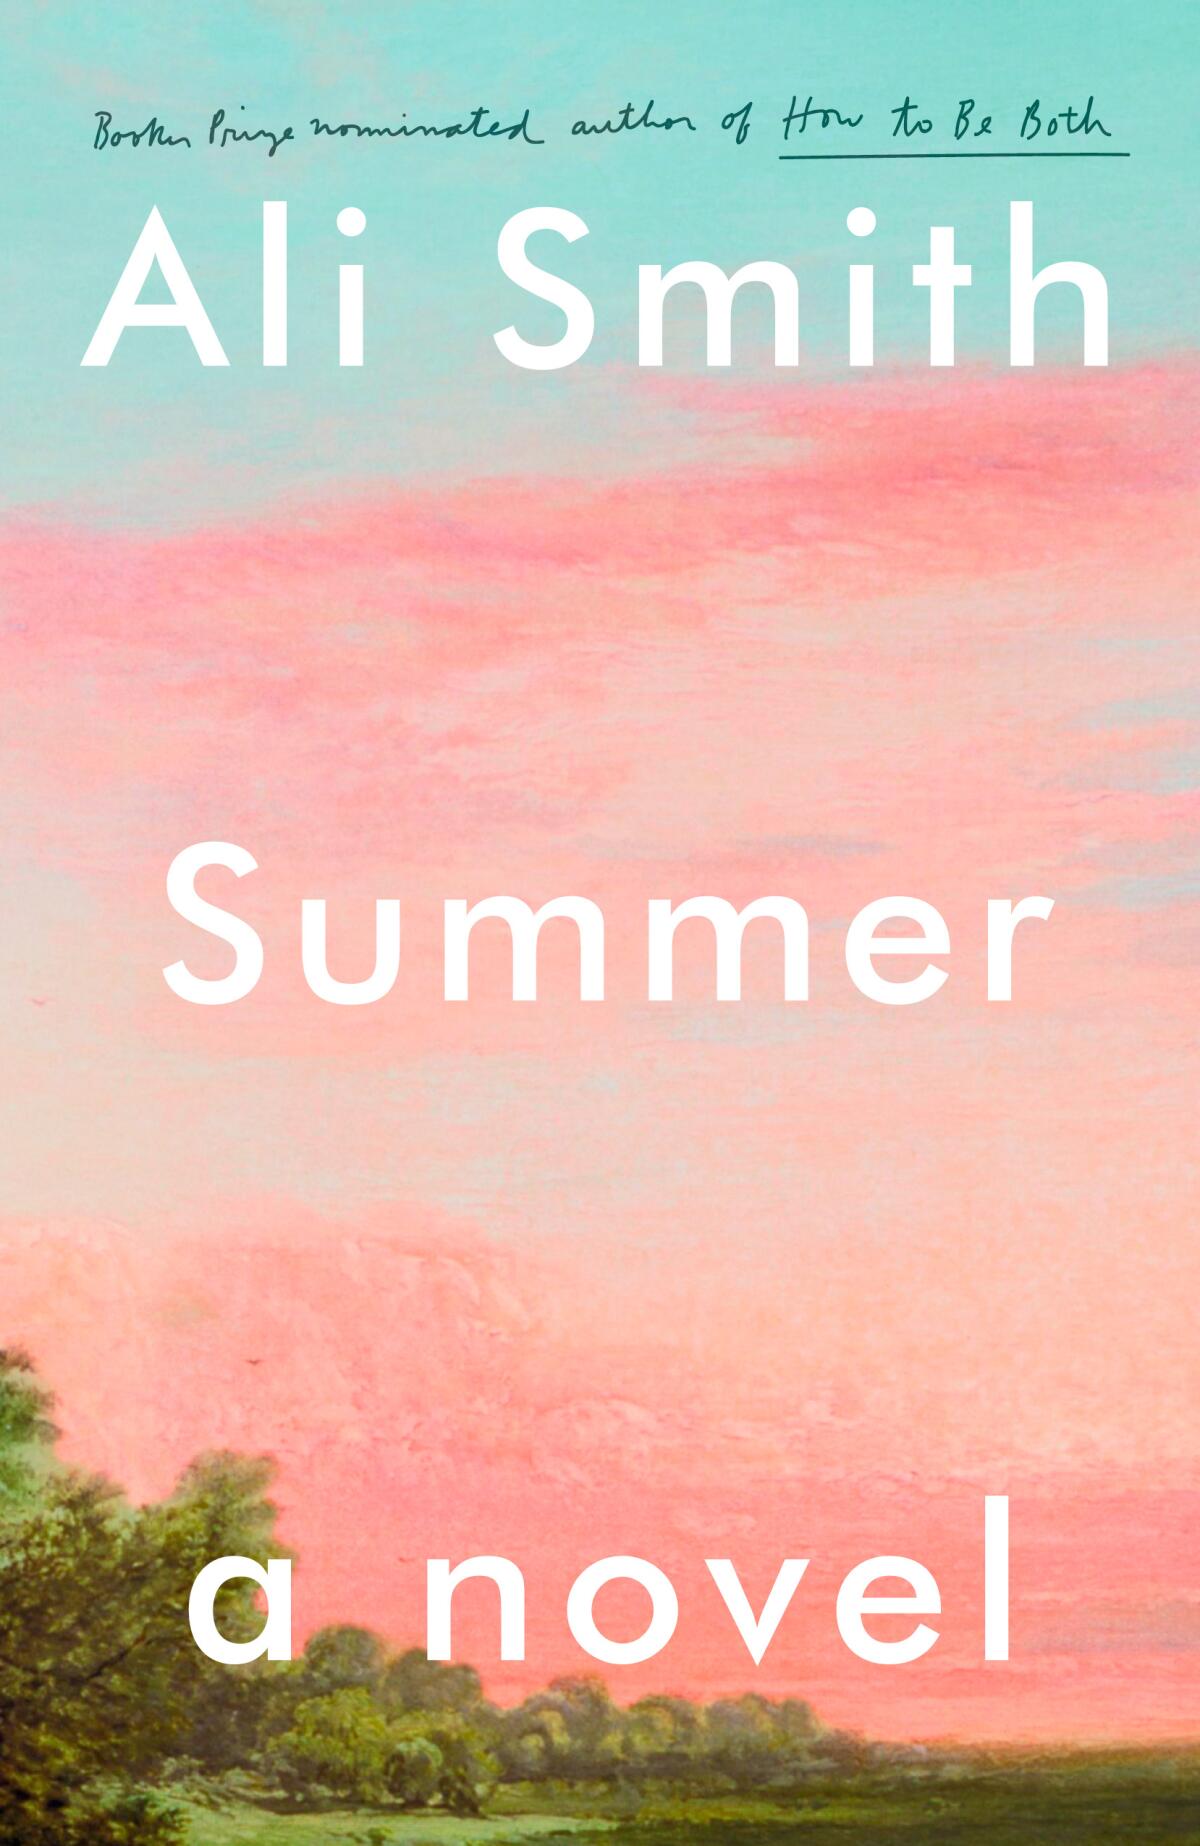 A book jacket for Ali Smith's "Summer." Credit: Pantheon